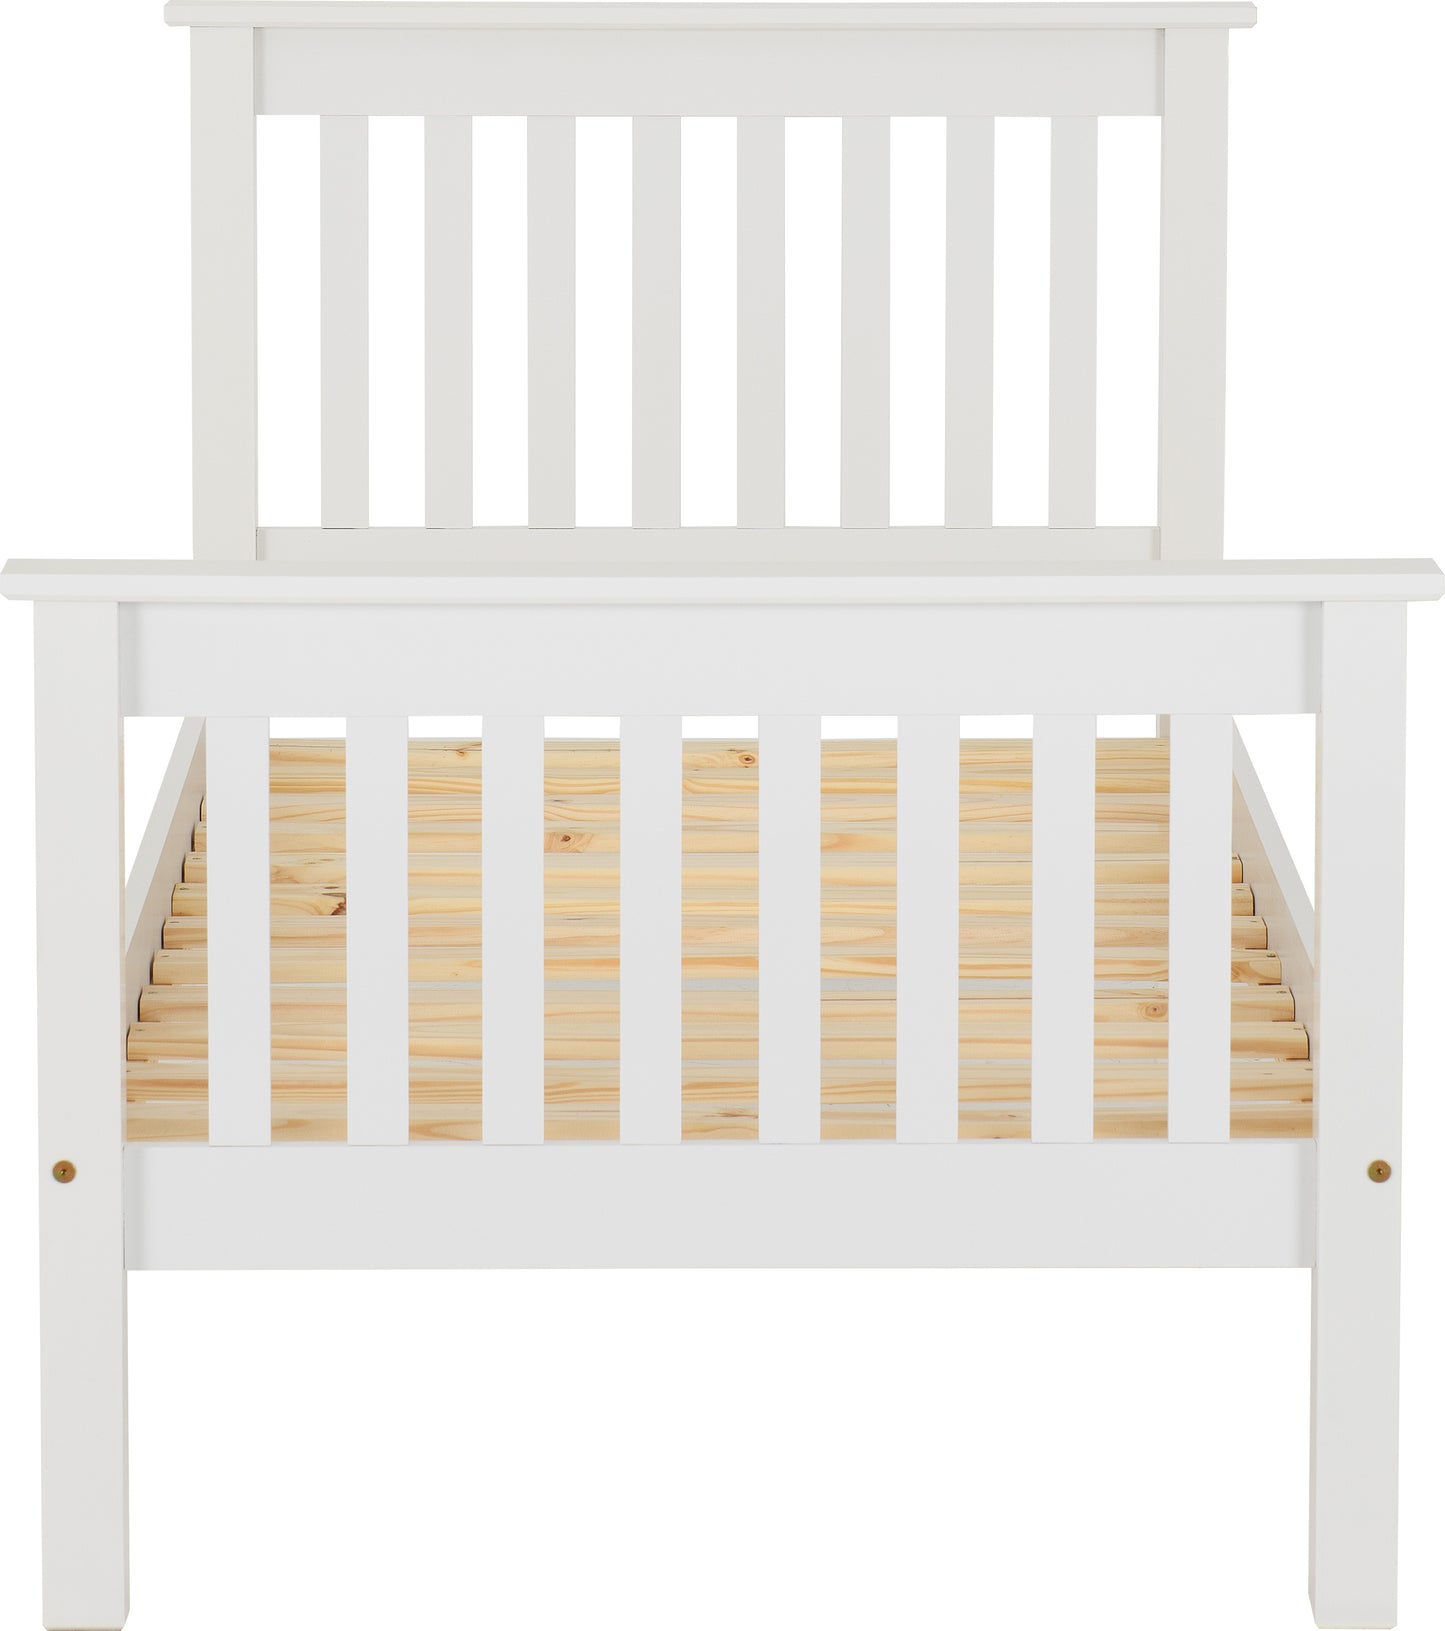 MONACO 3' BED HIGH FOOT END - WHITE